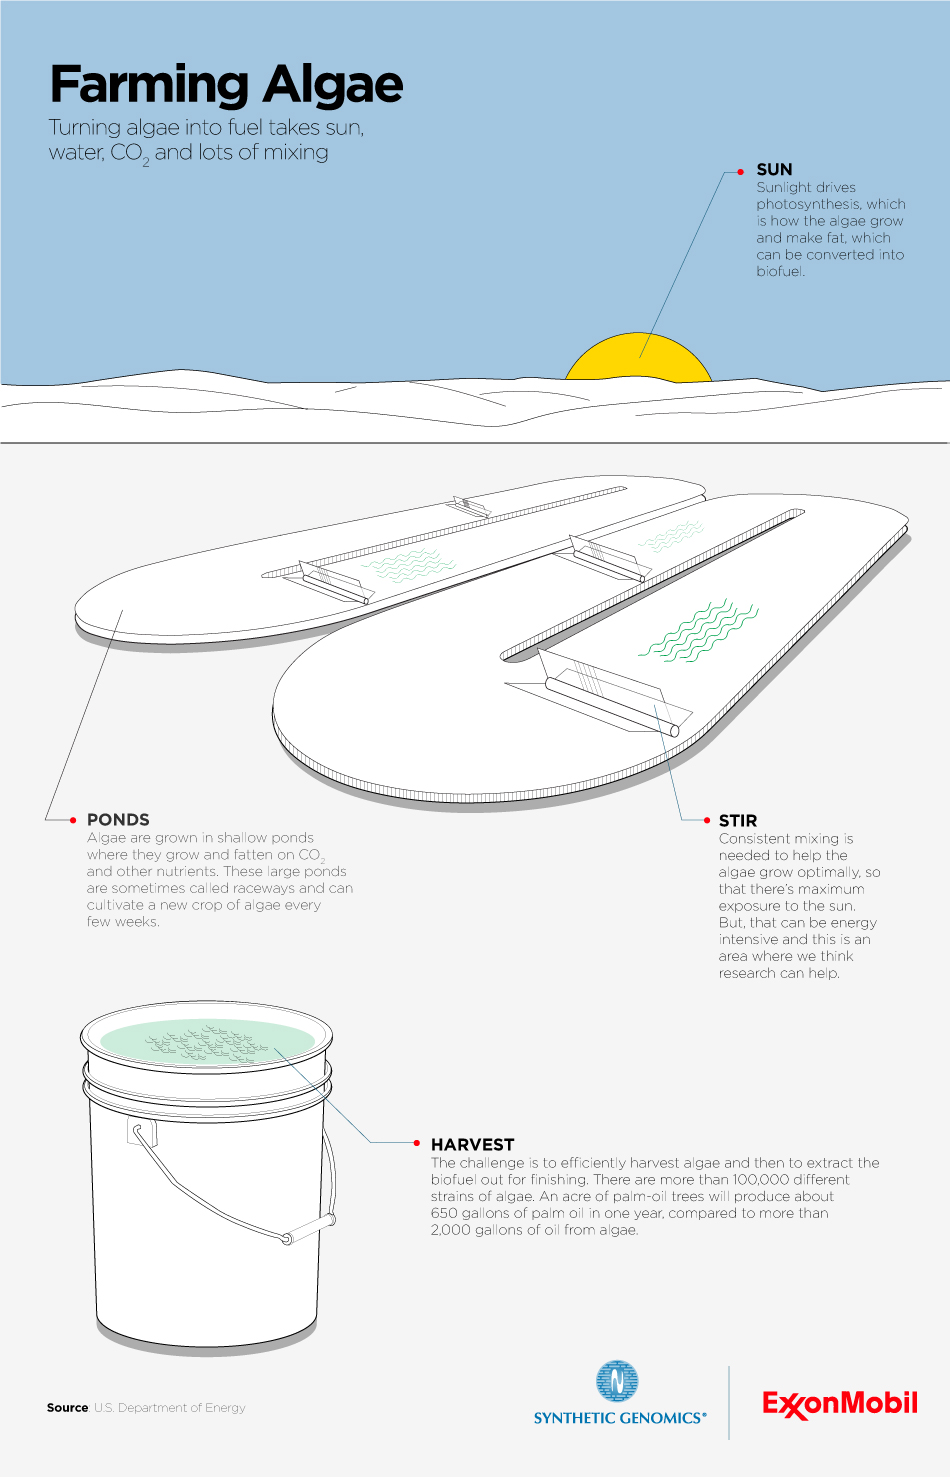 Infographic on the process of turning algae into fuel